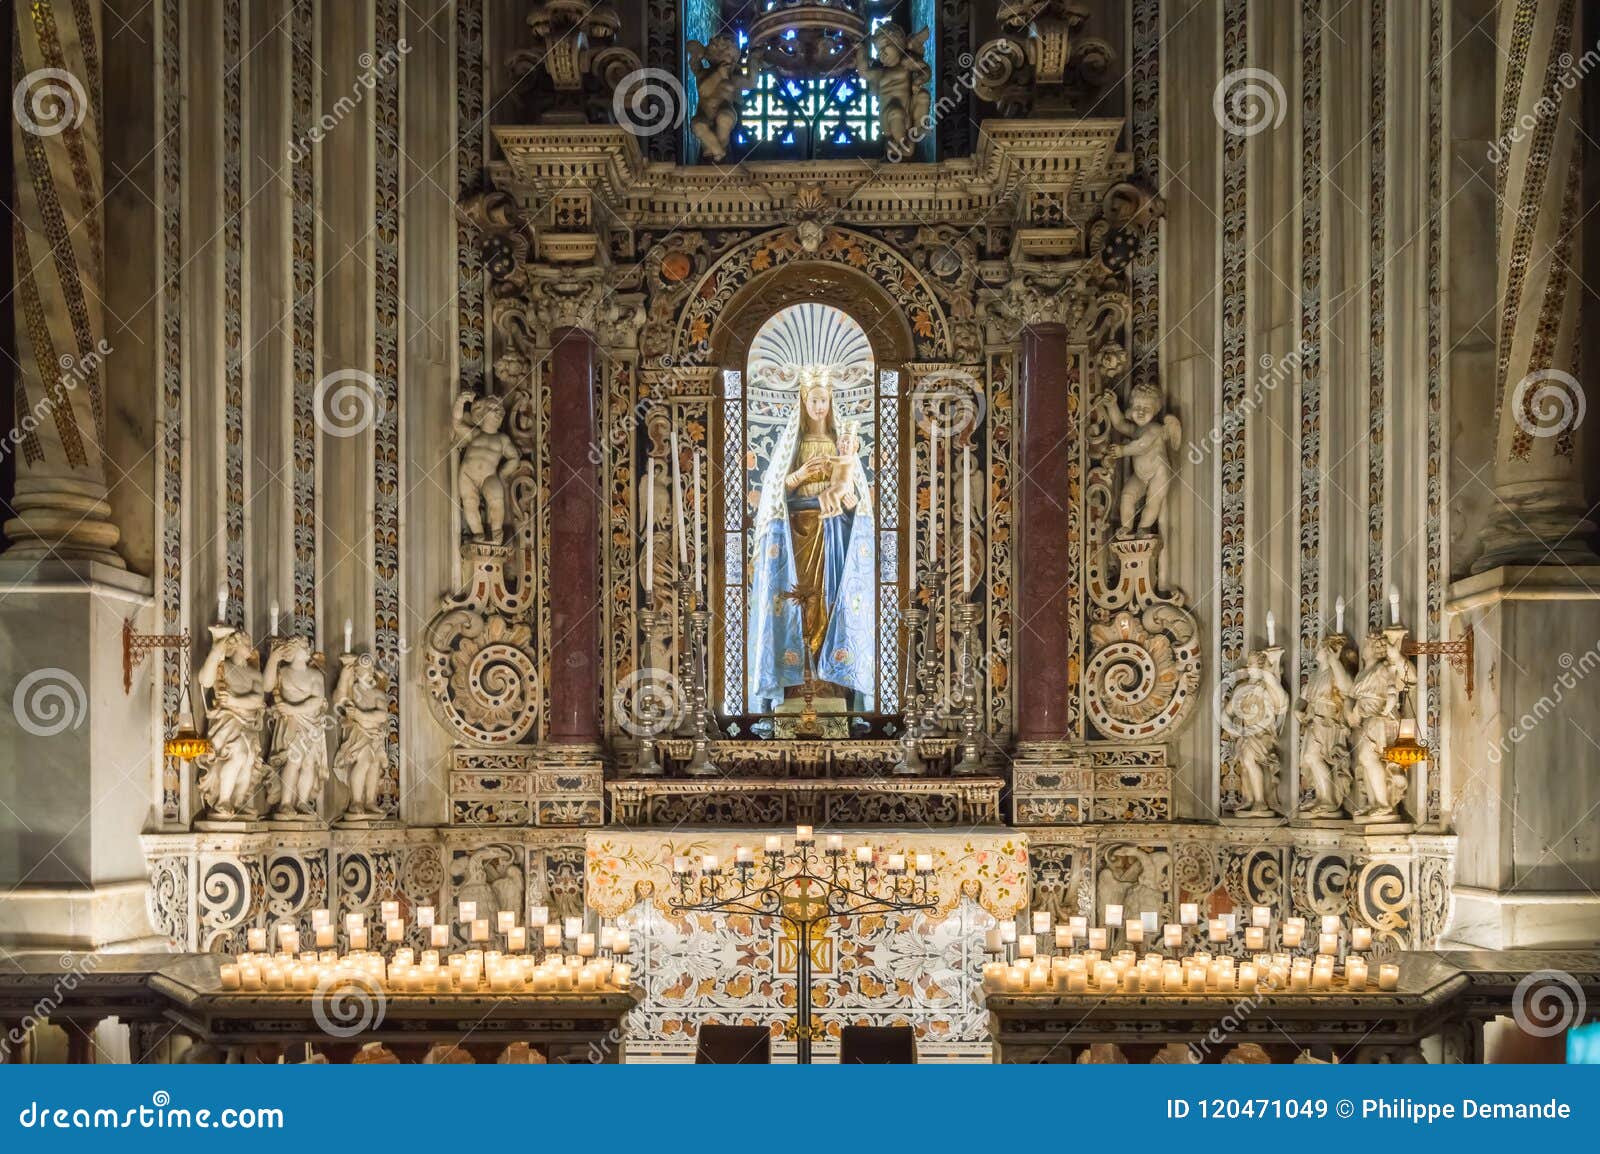 altar of the virgin mary with the child jesus